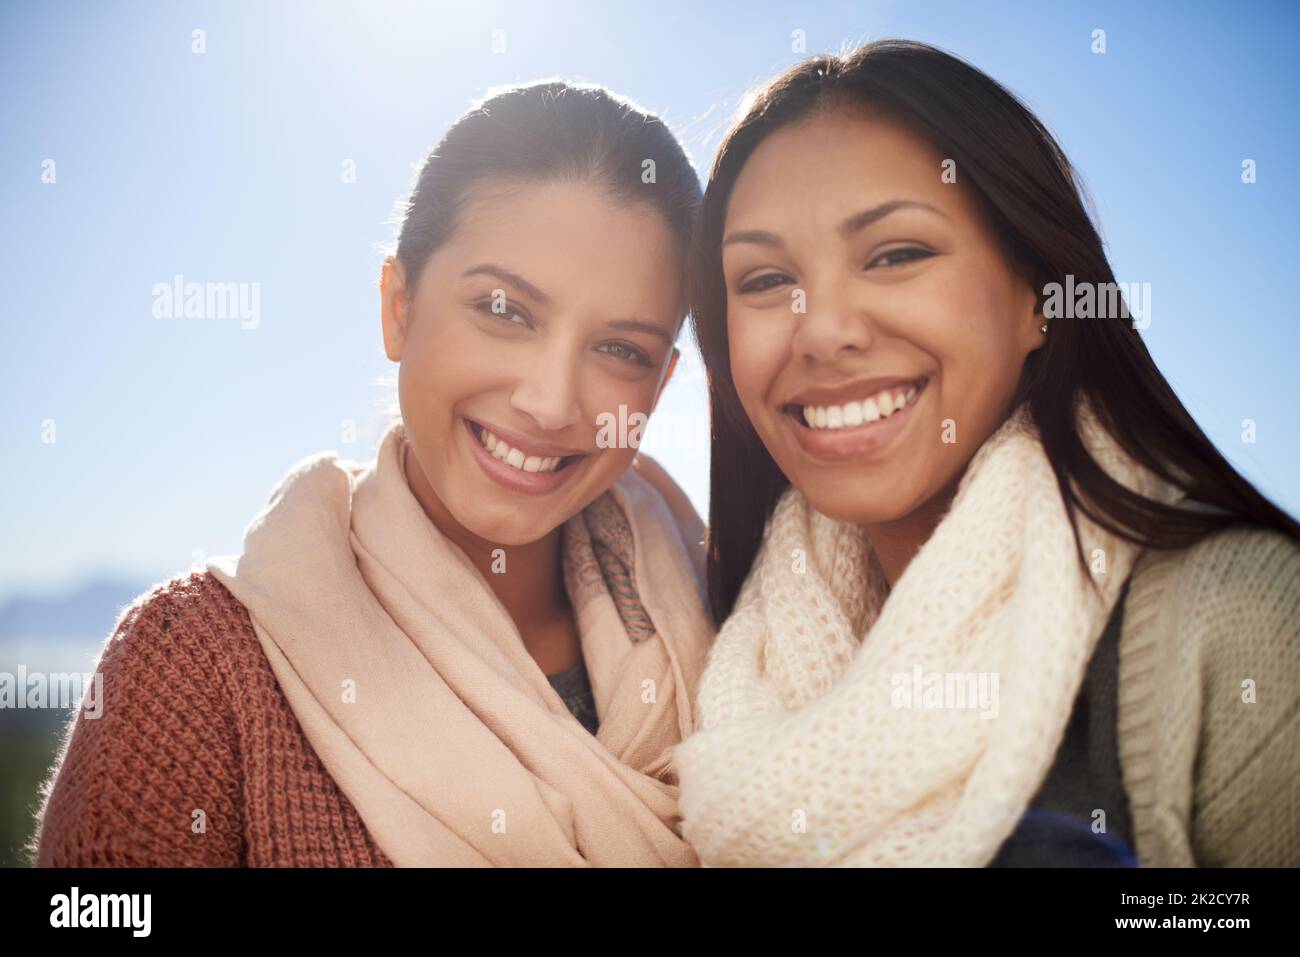 Our friendship is built to last. Two young women smiling happily at the camera. Stock Photo